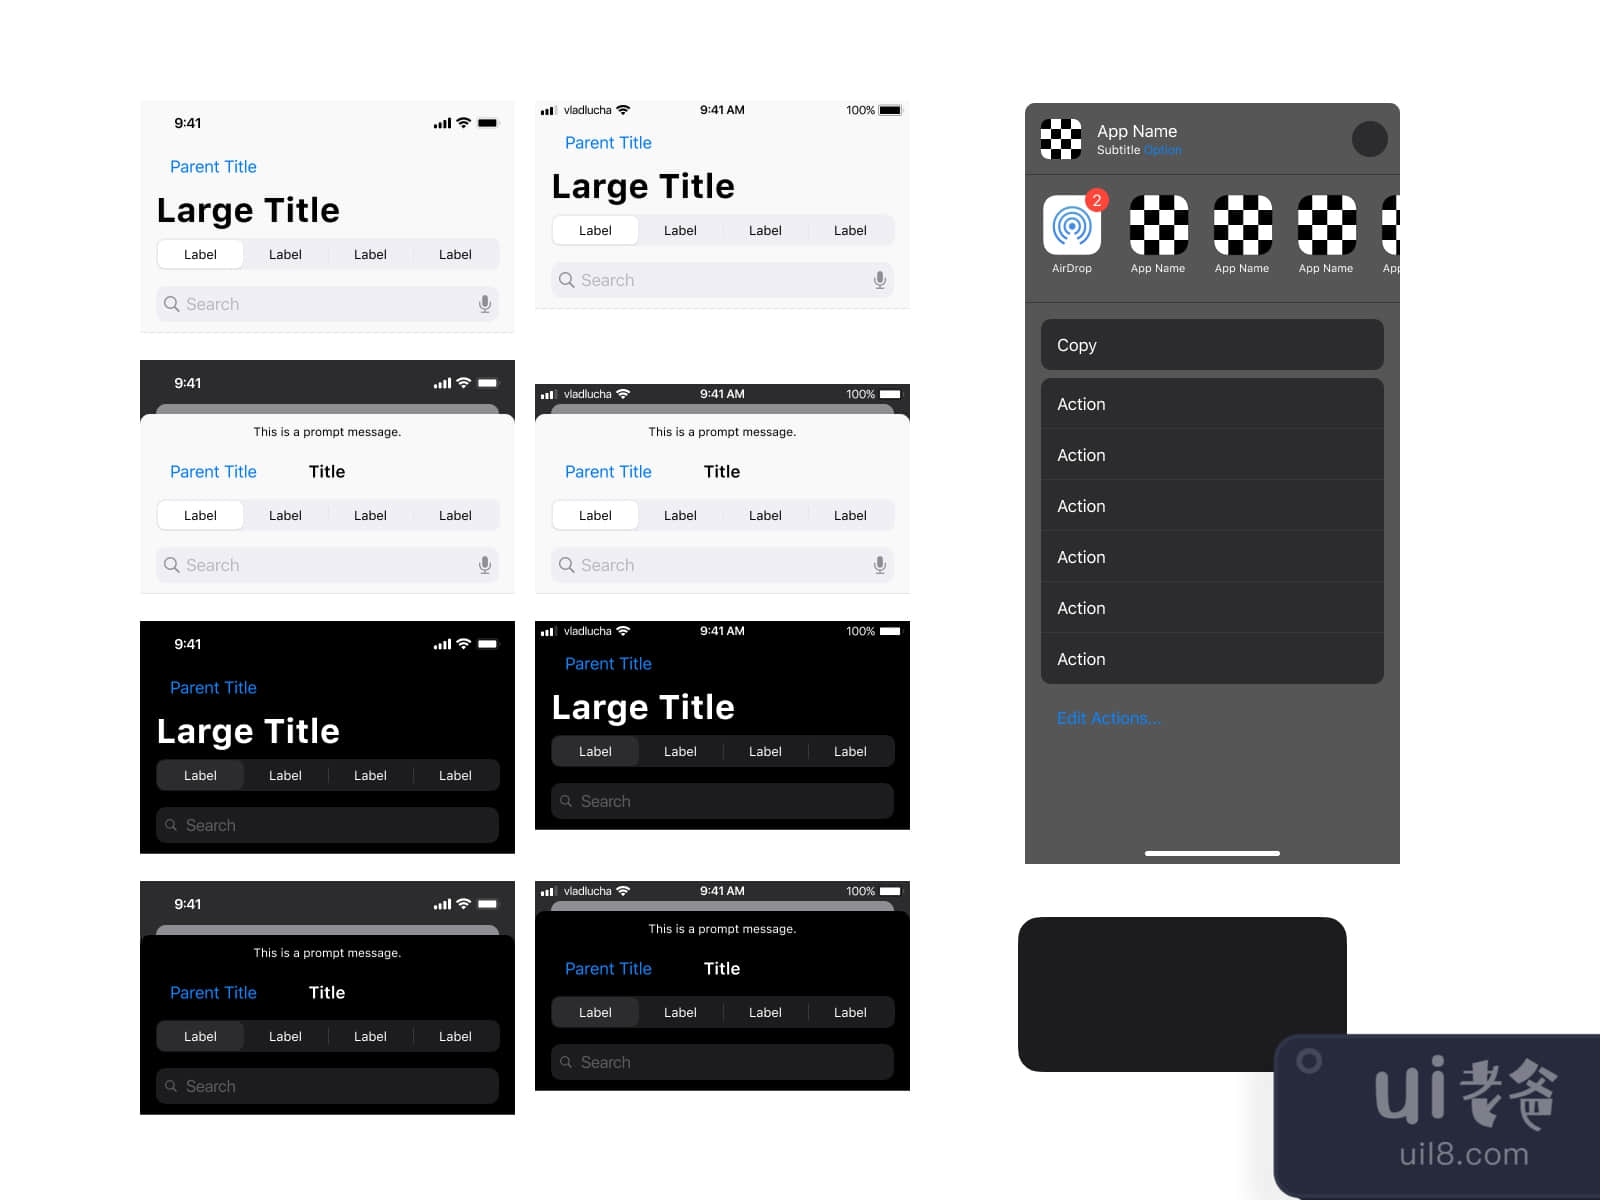 iOS Native Styles UI Kit for Figma and Adobe XD No 3